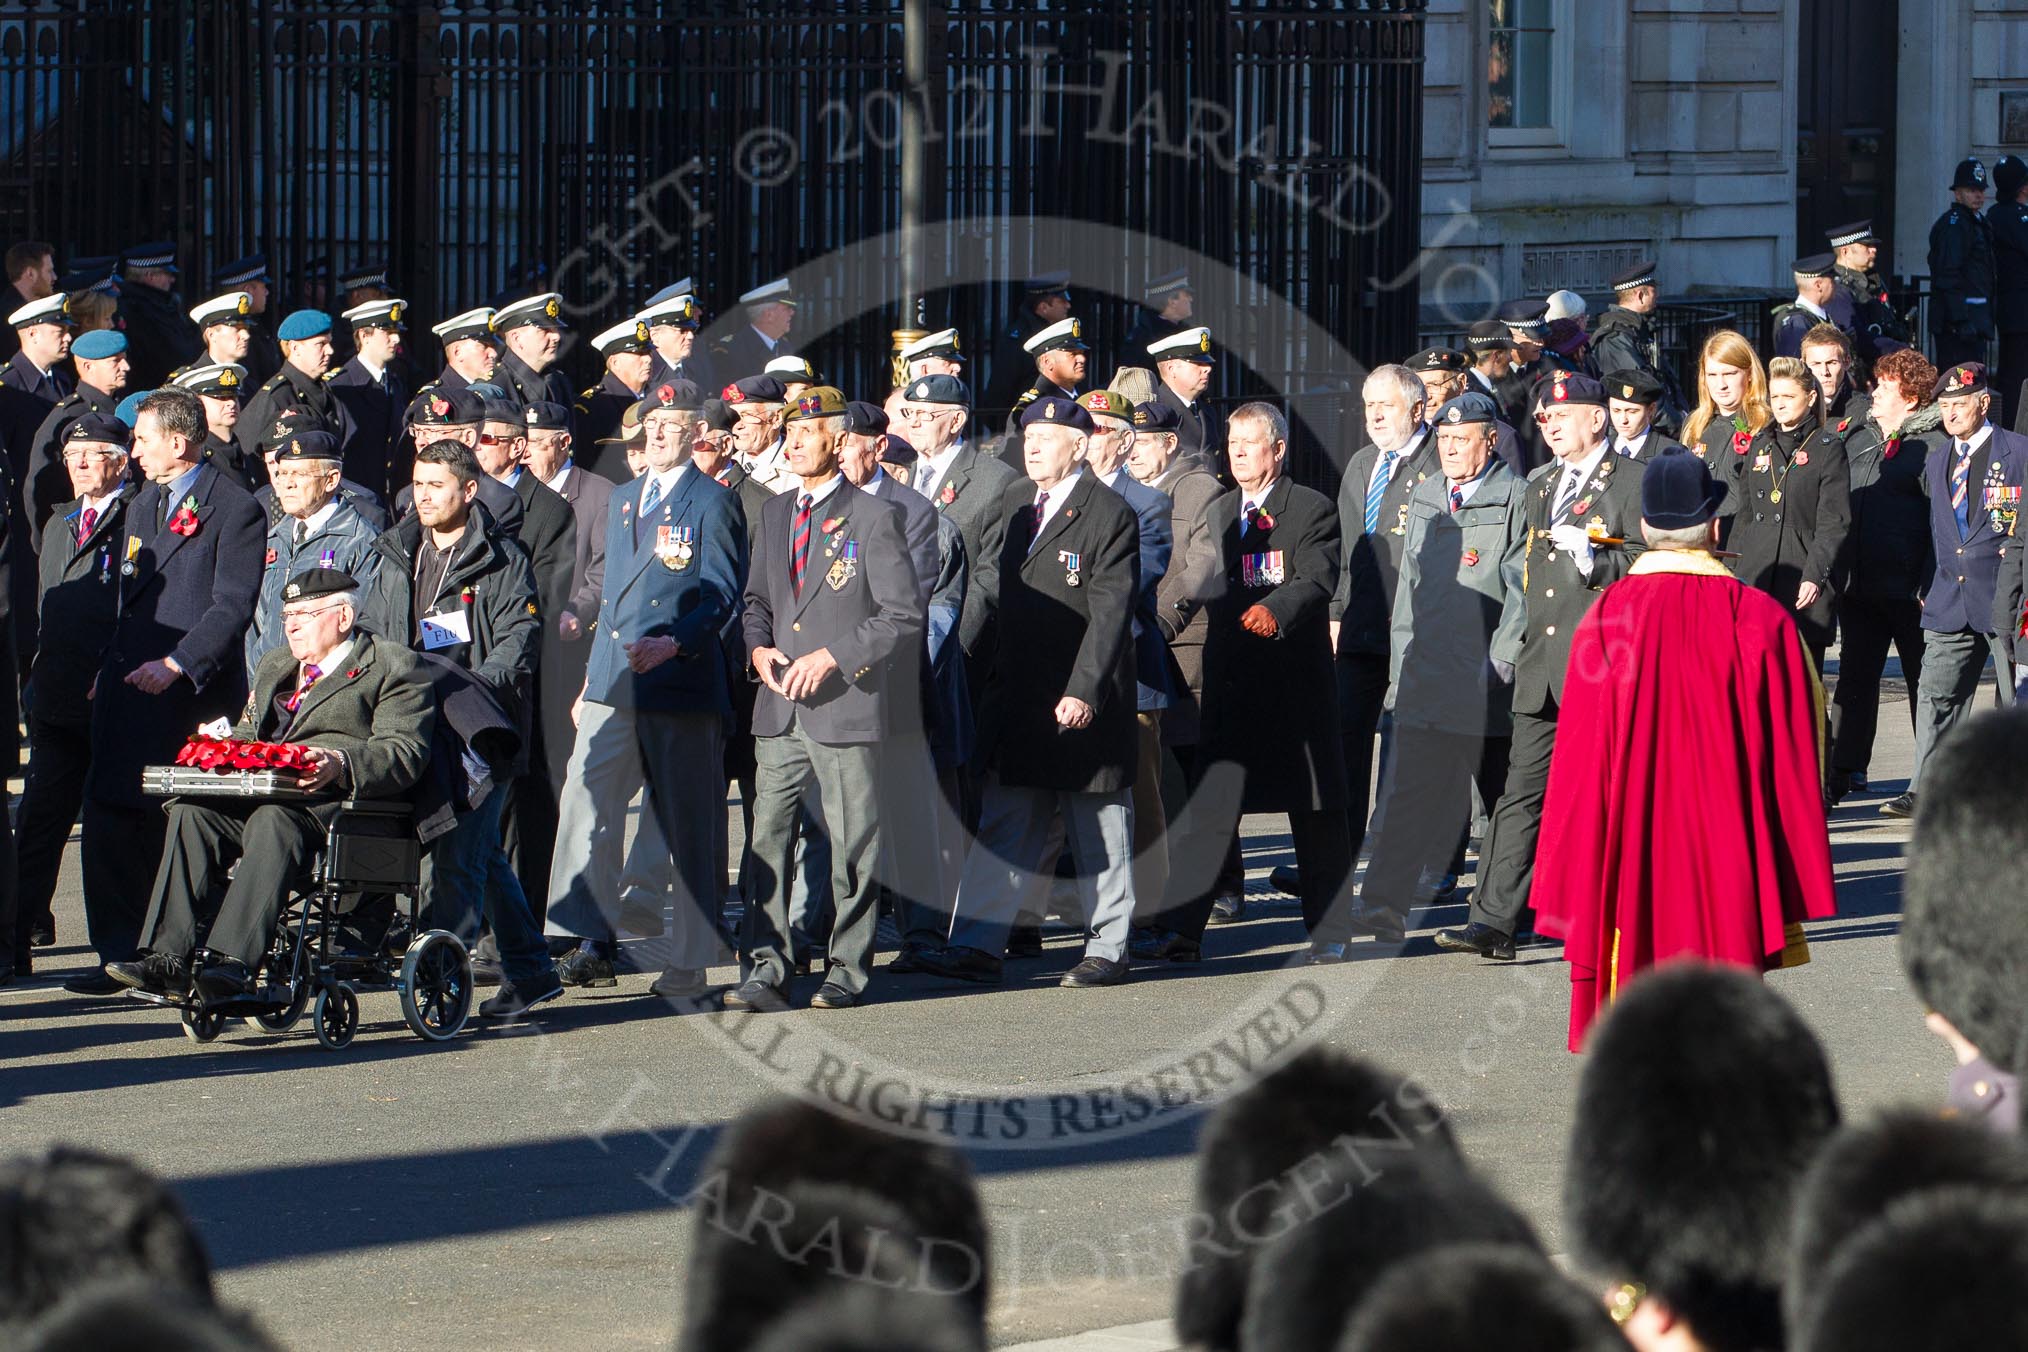 Remembrance Sunday 2012 Cenotaph March Past: Group F10 - National Service Veterans Alliance..
Whitehall, Cenotaph,
London SW1,

United Kingdom,
on 11 November 2012 at 11:46, image #450